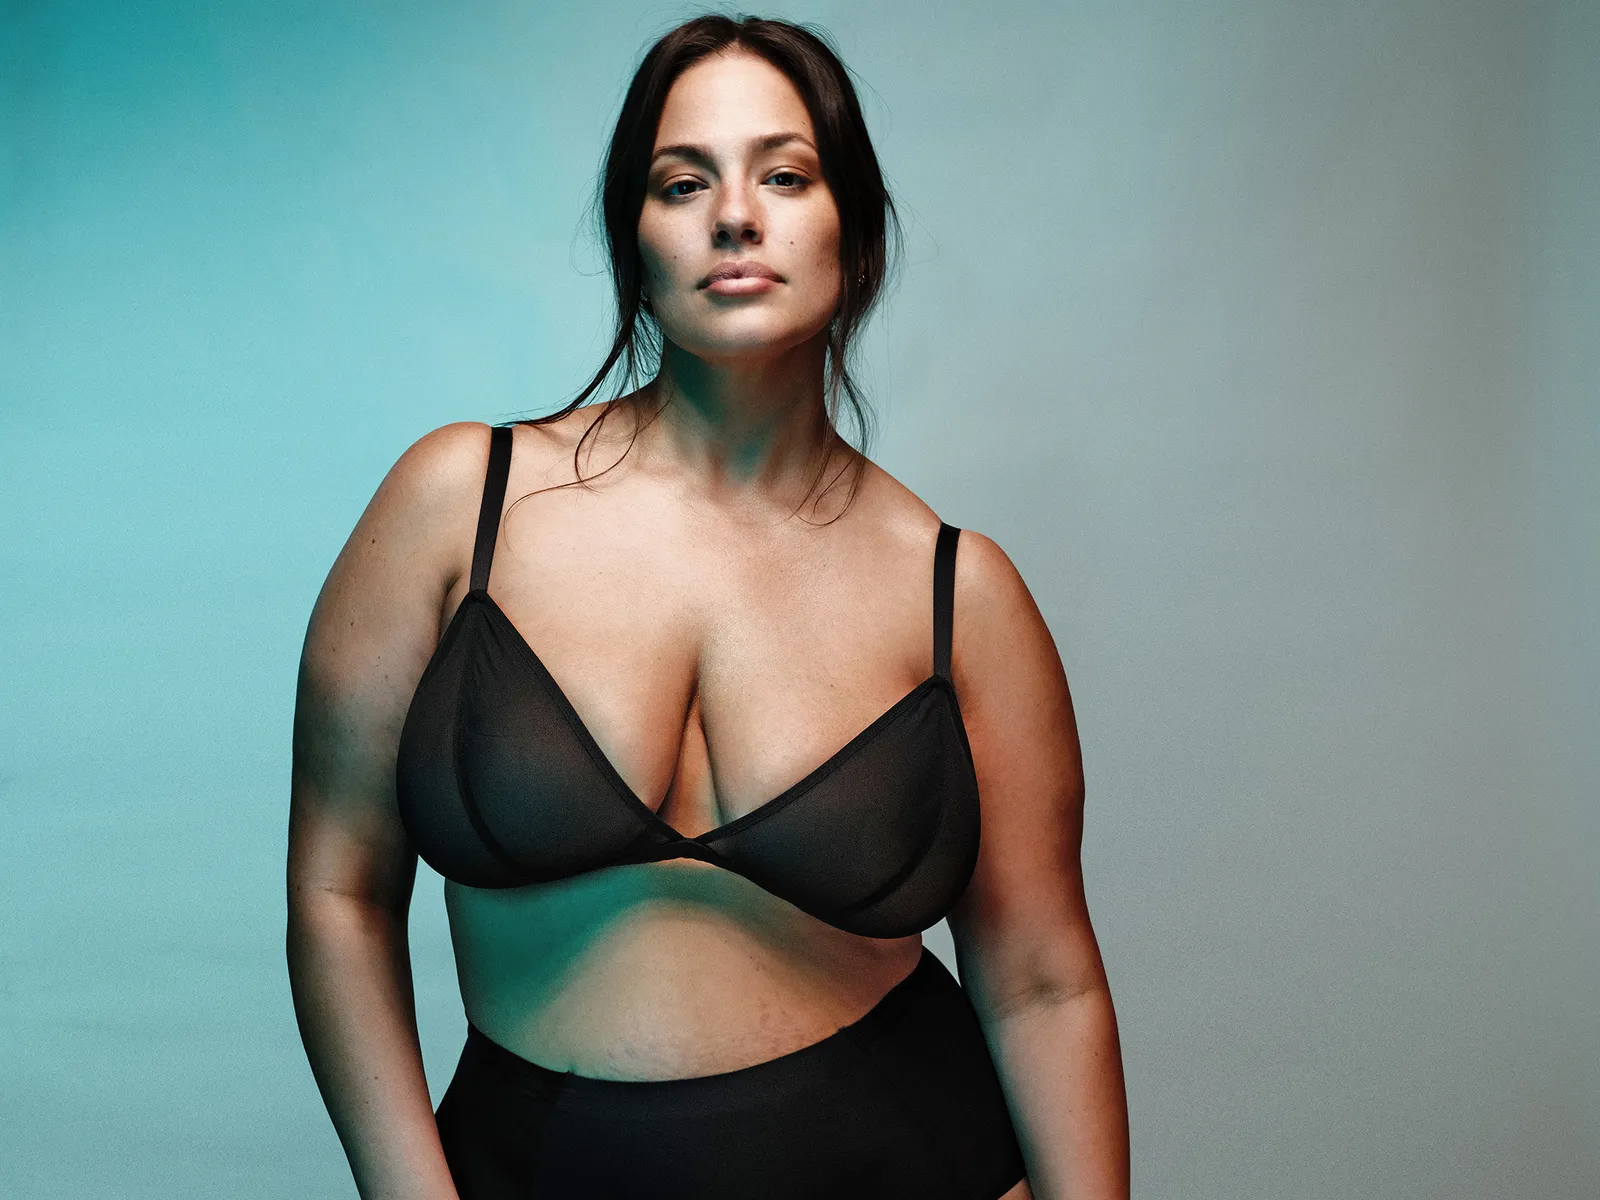 The most famous plus-size model Ashley Graham showed a new collection of spectacular underwear, which she made herself